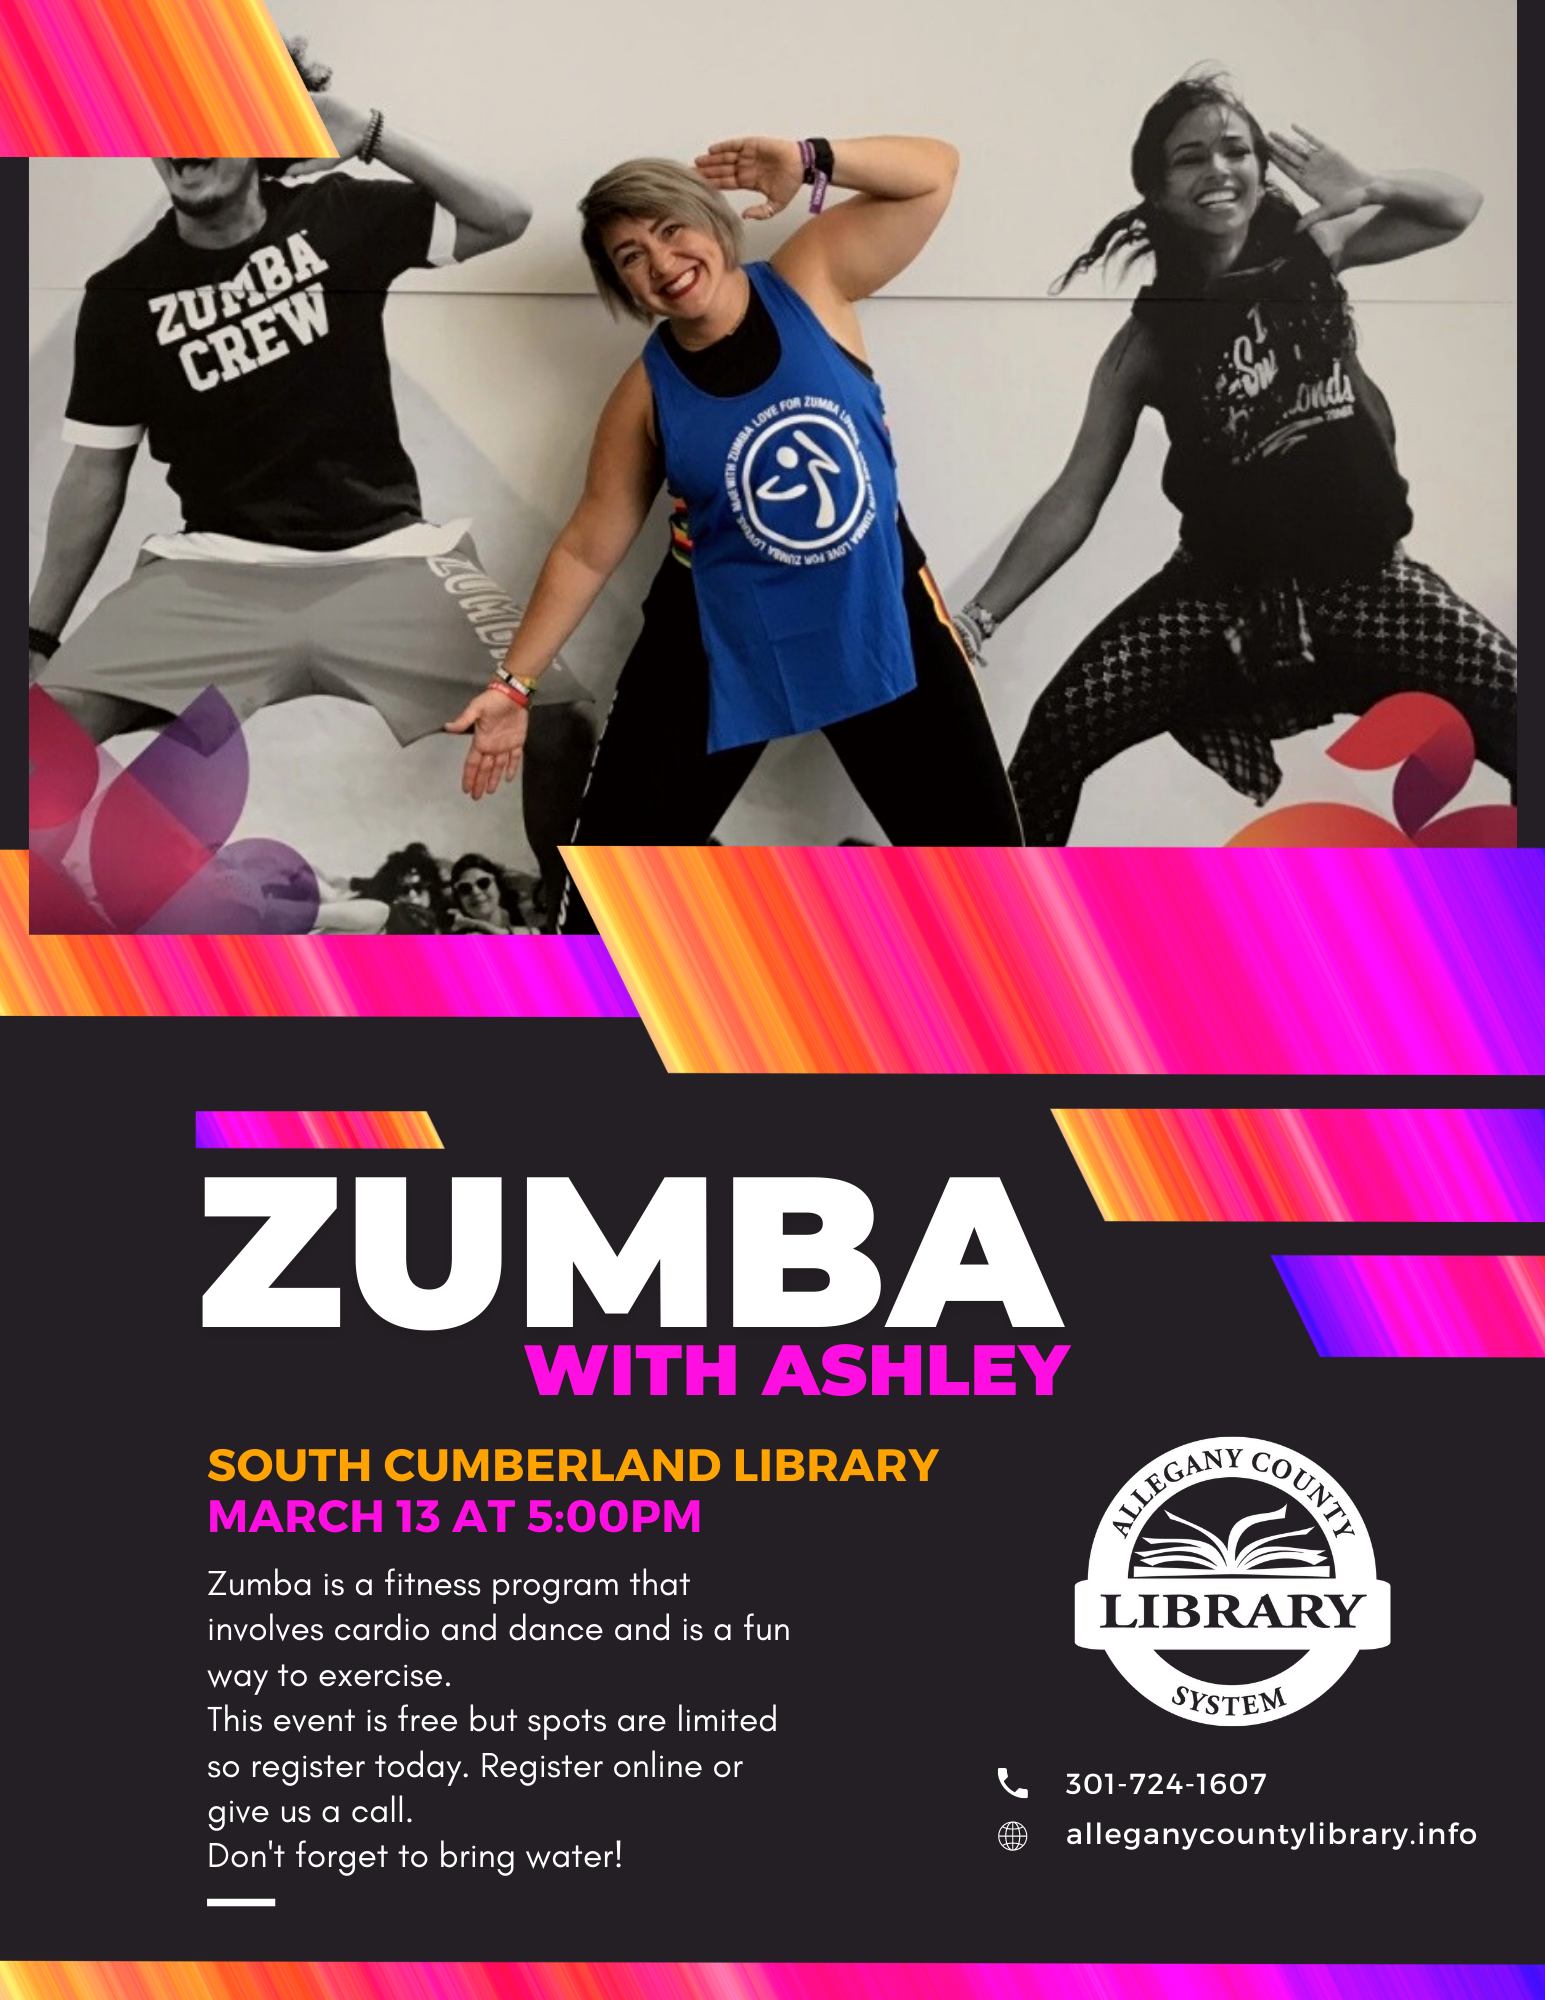 Zumba with Ashley event details